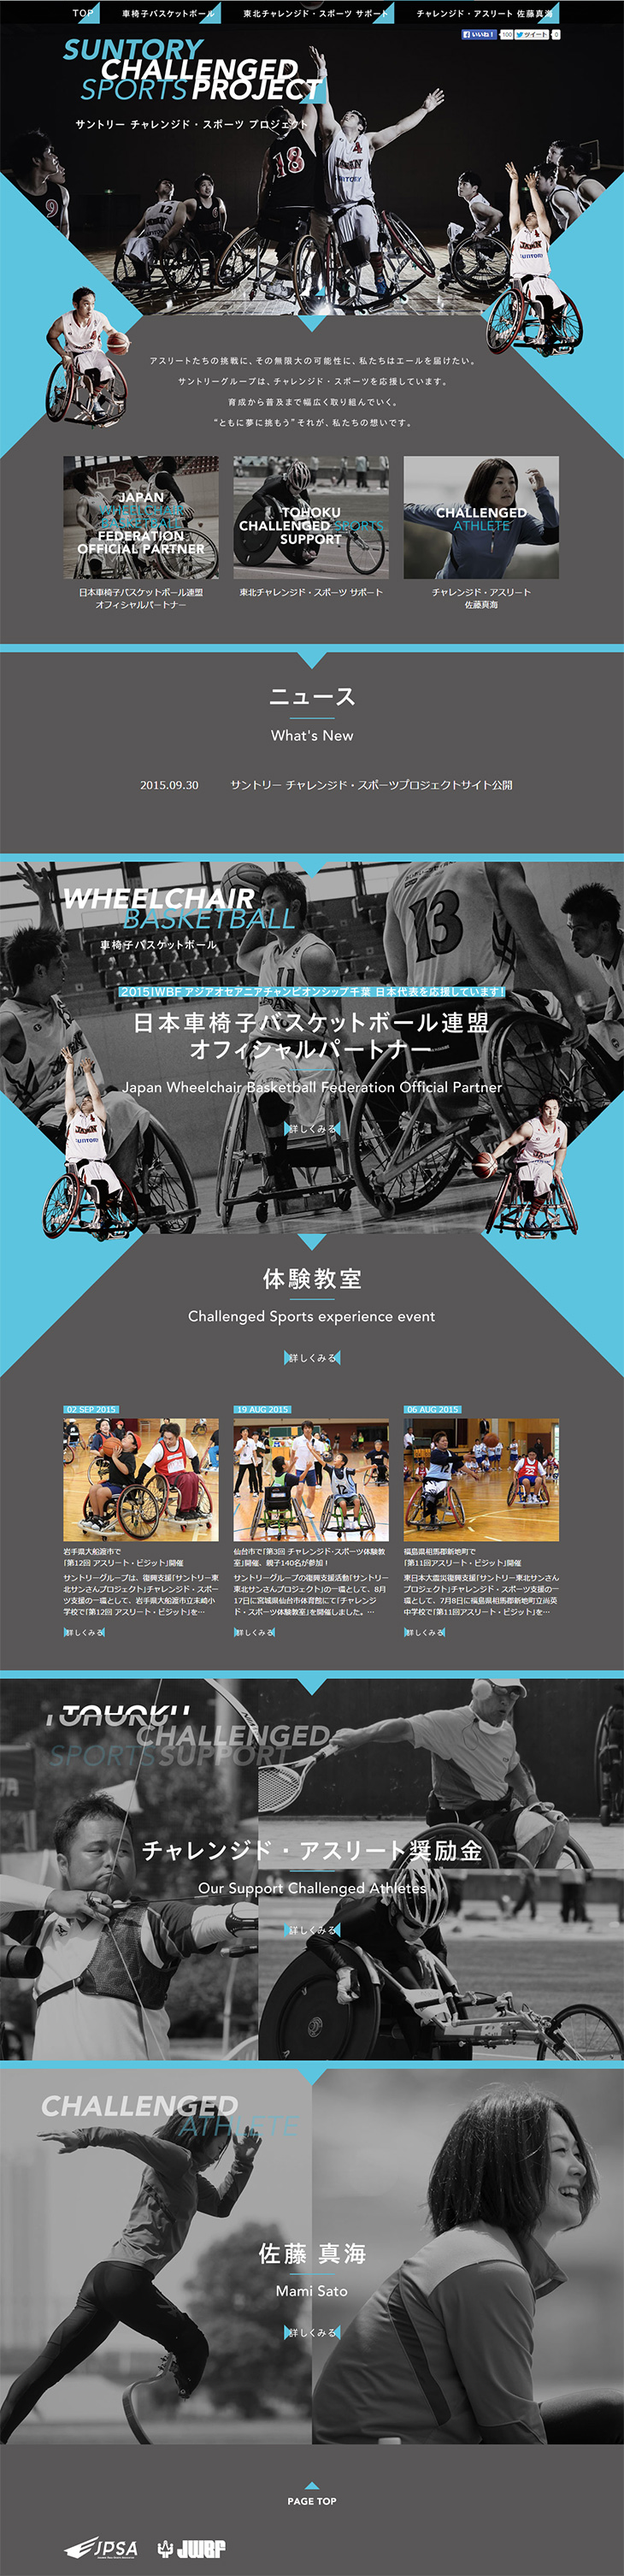 SUNTORY CHALLENGED SPORTS PROJECT_pc_1